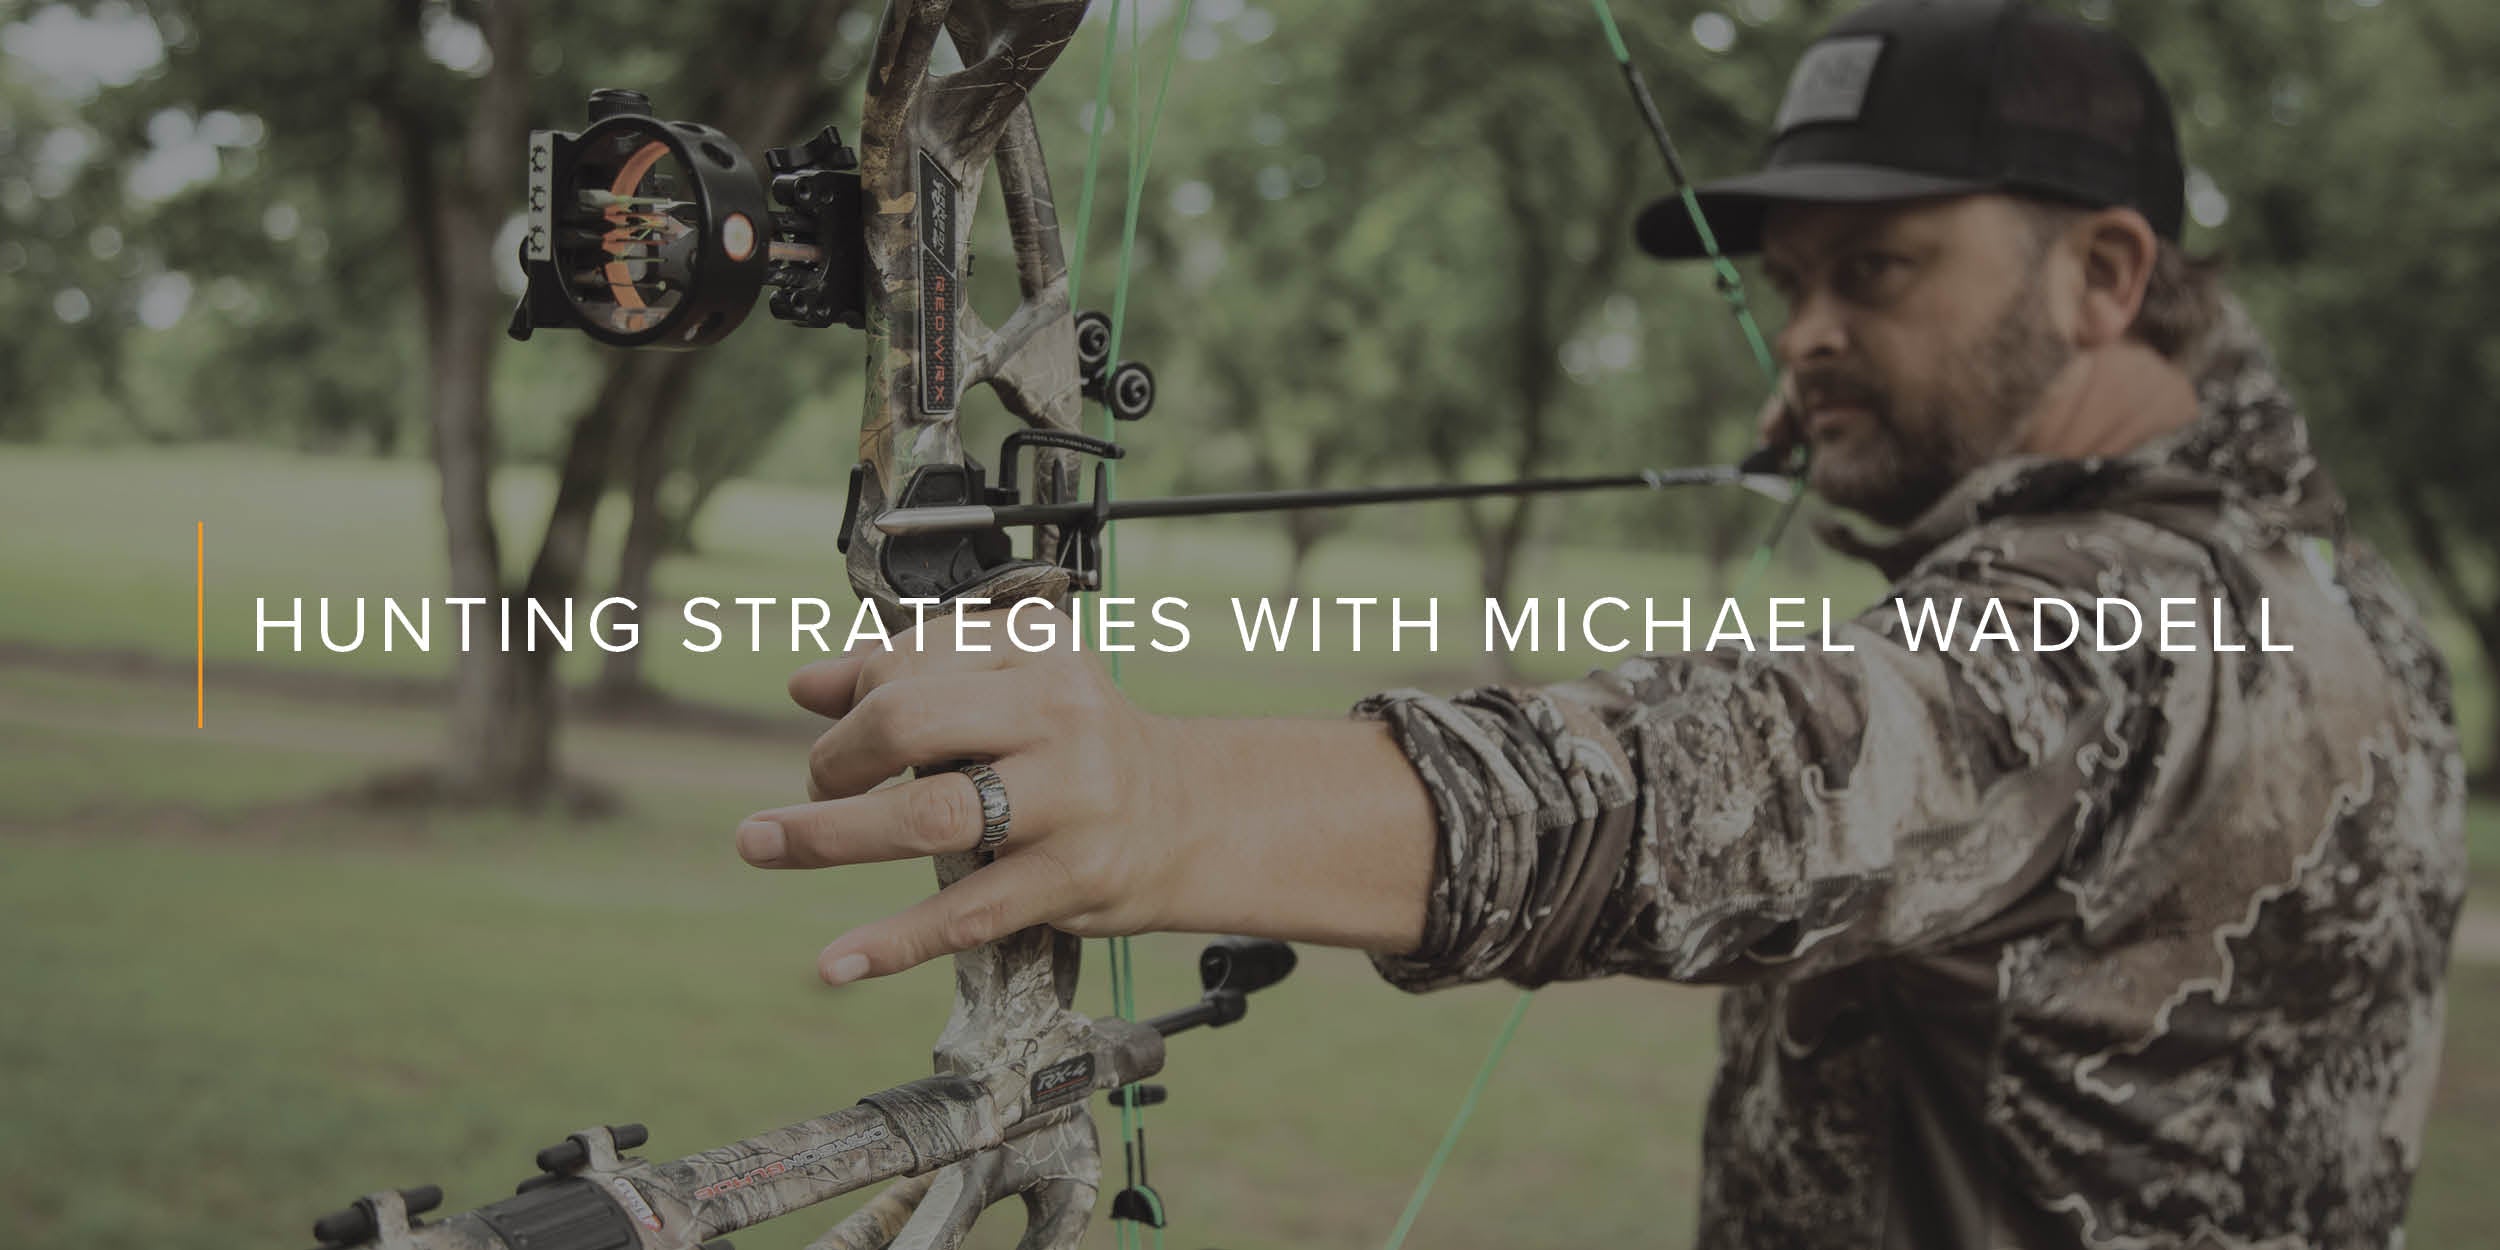 Hunting Strategies with Michael Waddell